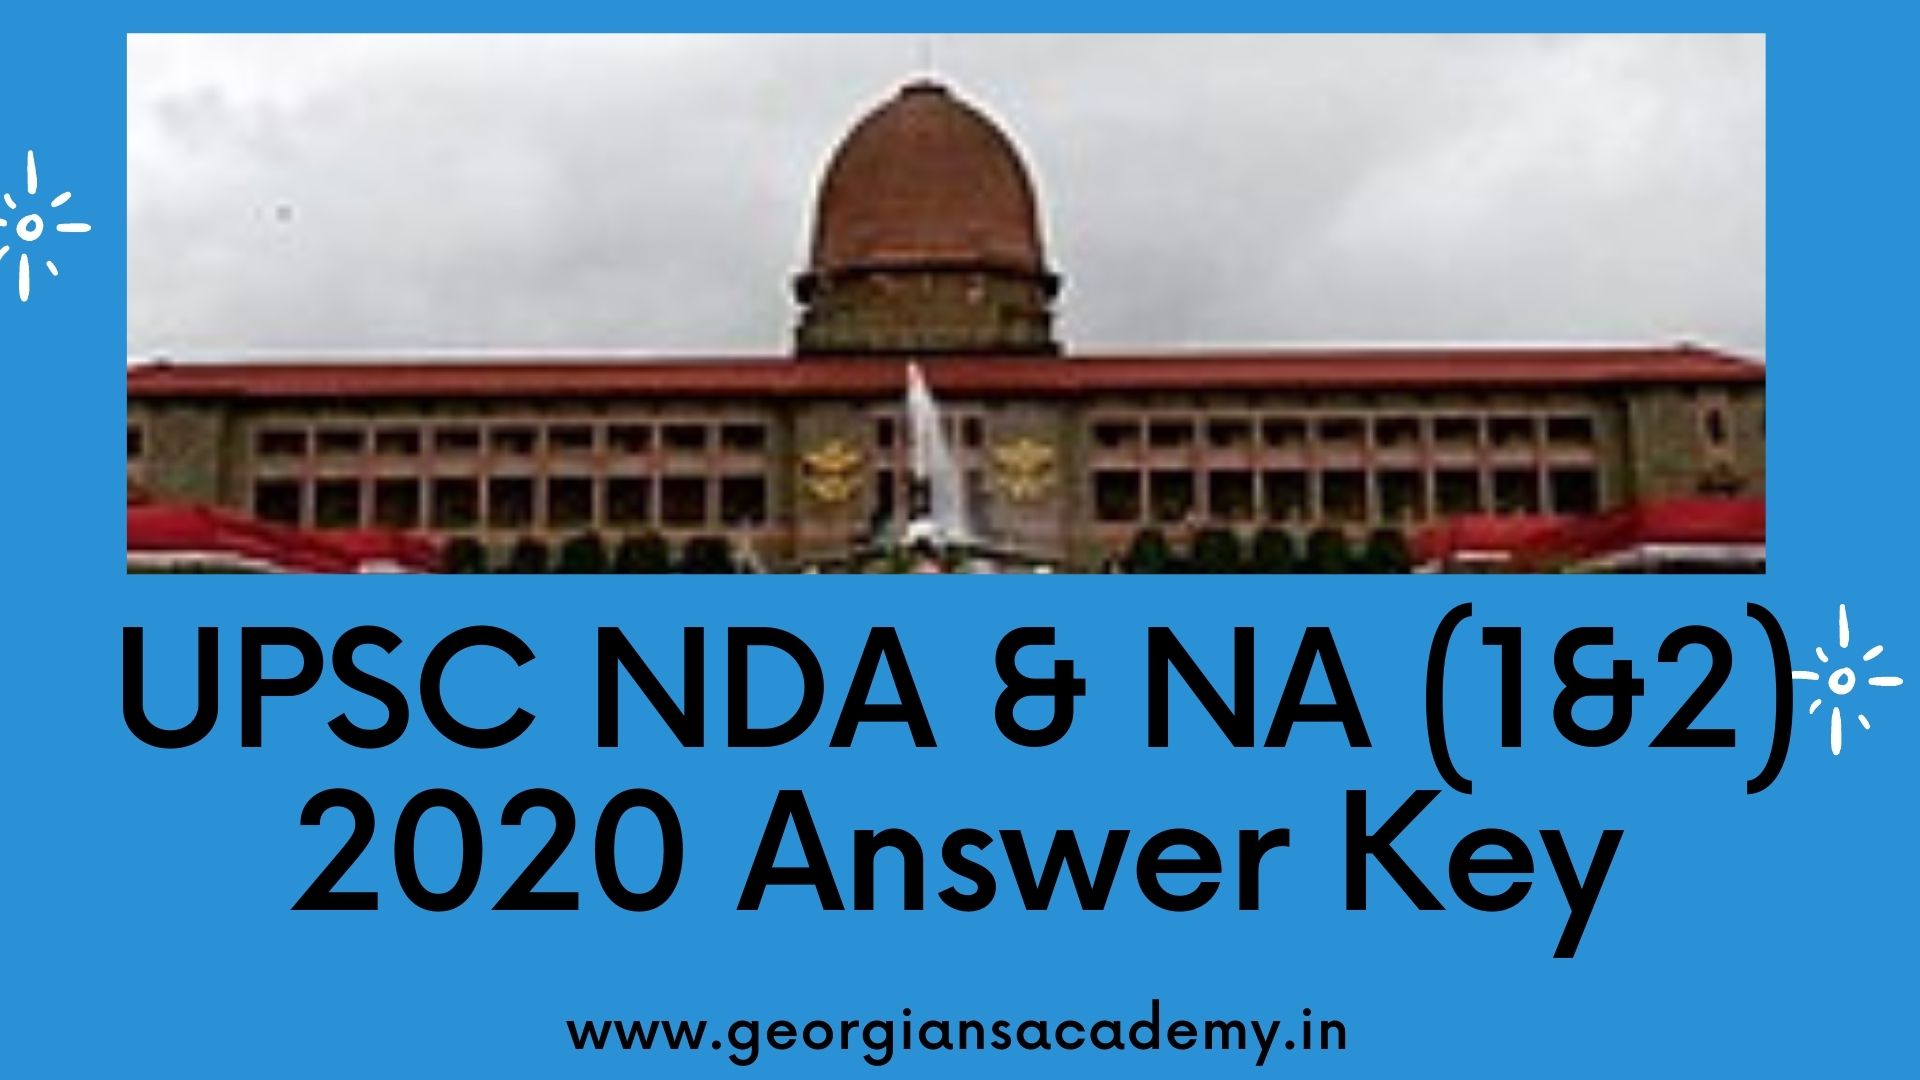 UPSC NDA & NA (1&2) 2020 Answer Key: Unofficial Answer Key released by Georgians Defence Academy for Professional studies